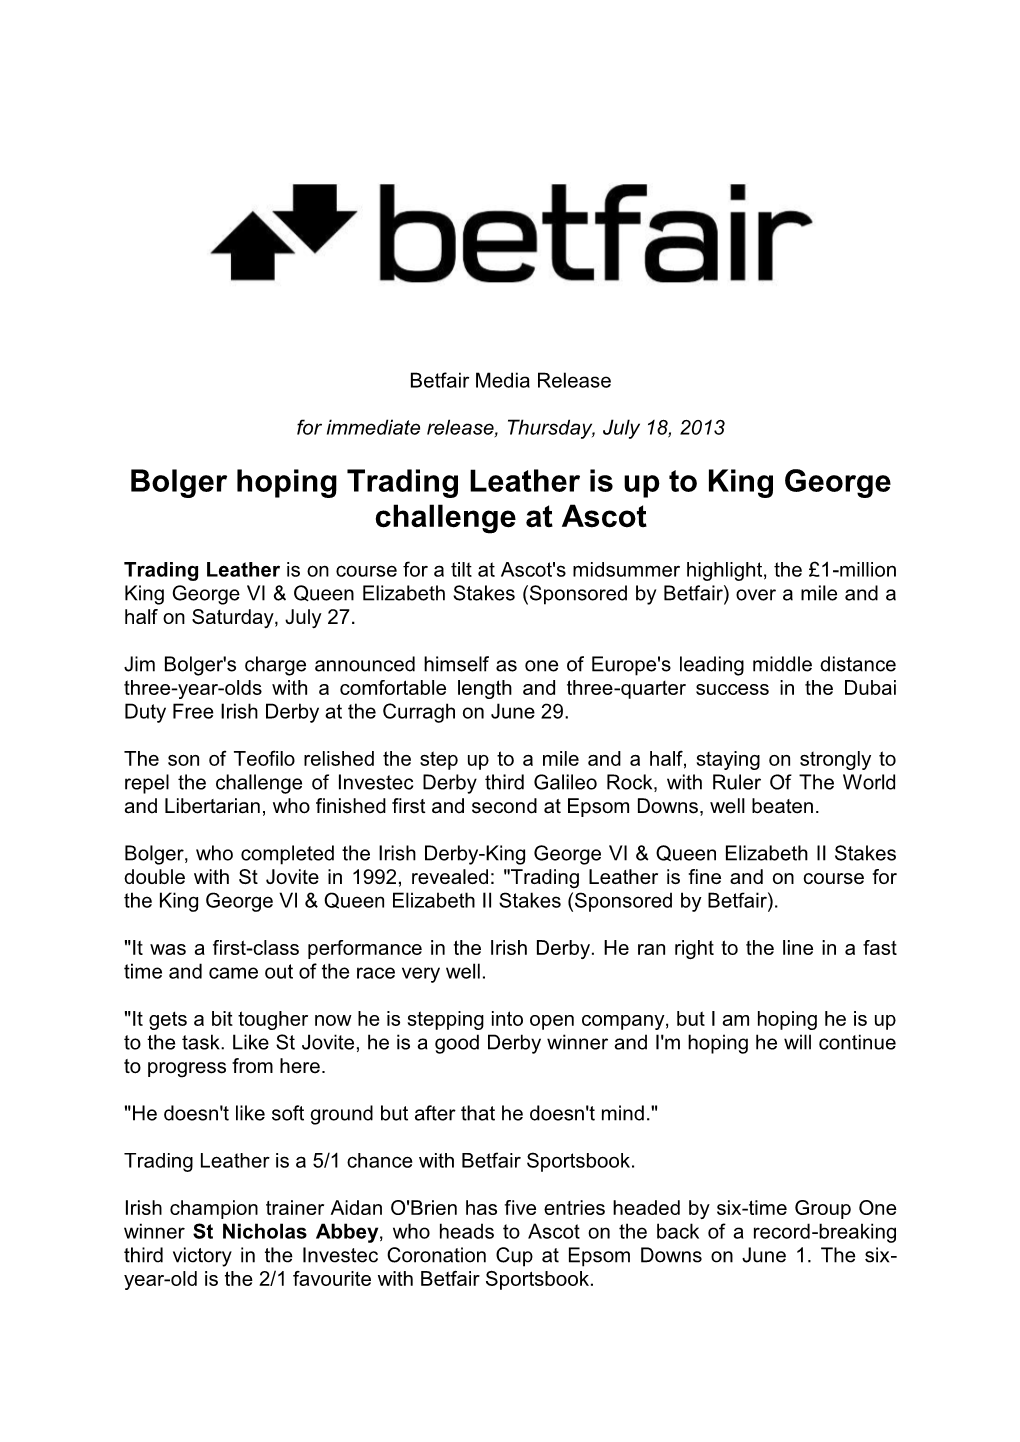 Bolger Hoping Trading Leather Is up to King George Challenge at Ascot